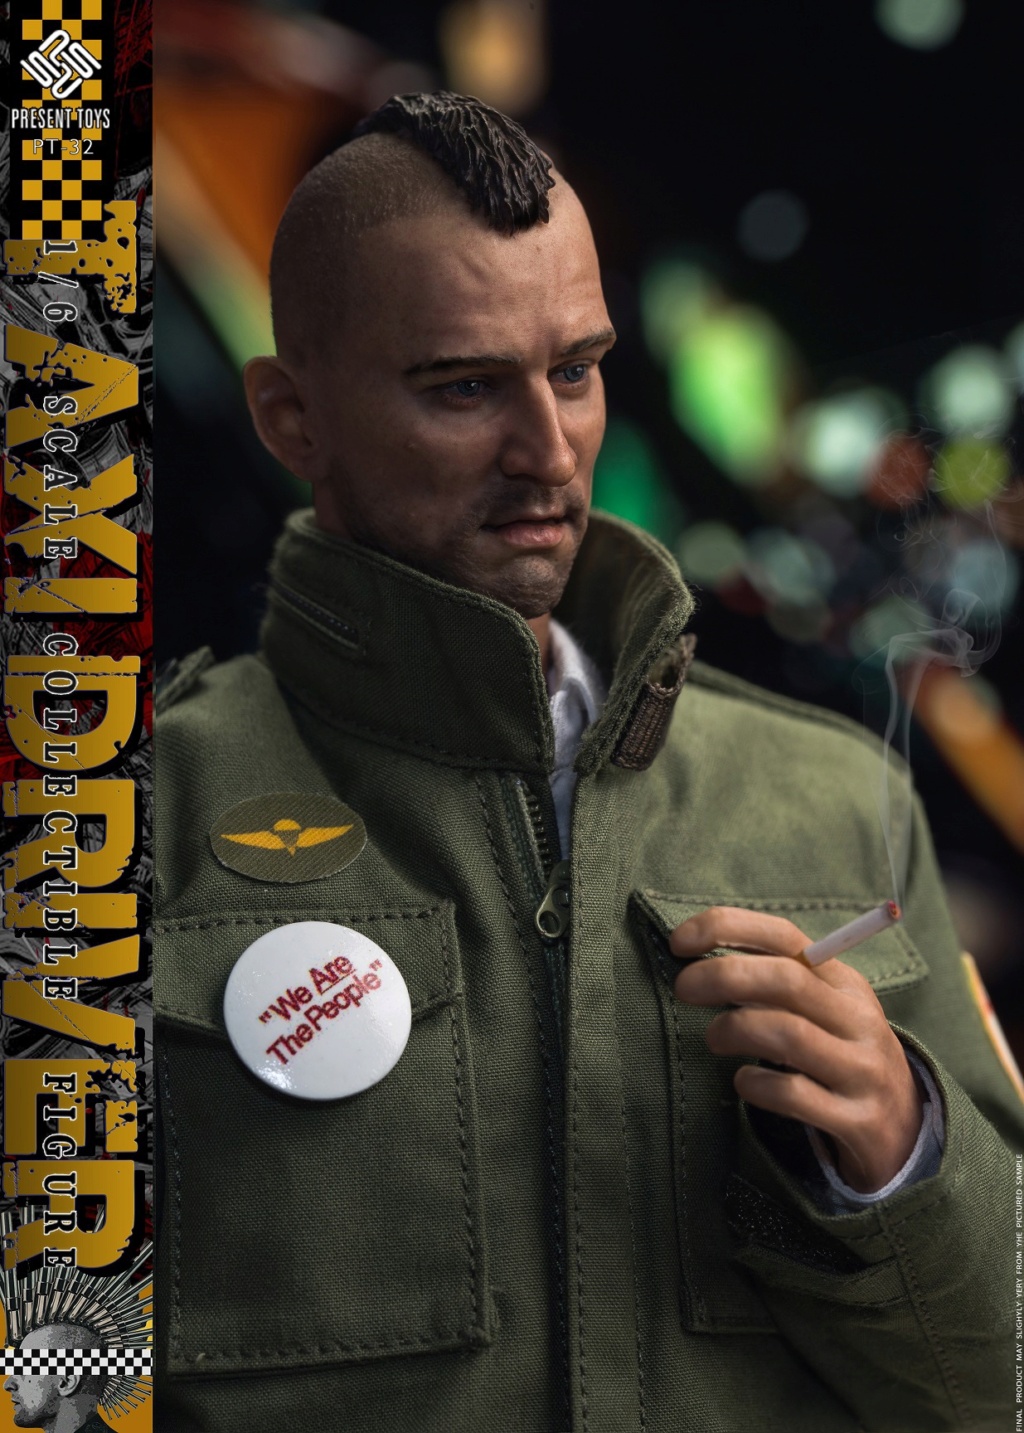 CrimeDrama - NEW PRODUCT: Present Toys: 1/6 "Taxi Driver" Collection Doll#PT-sp32 18192510